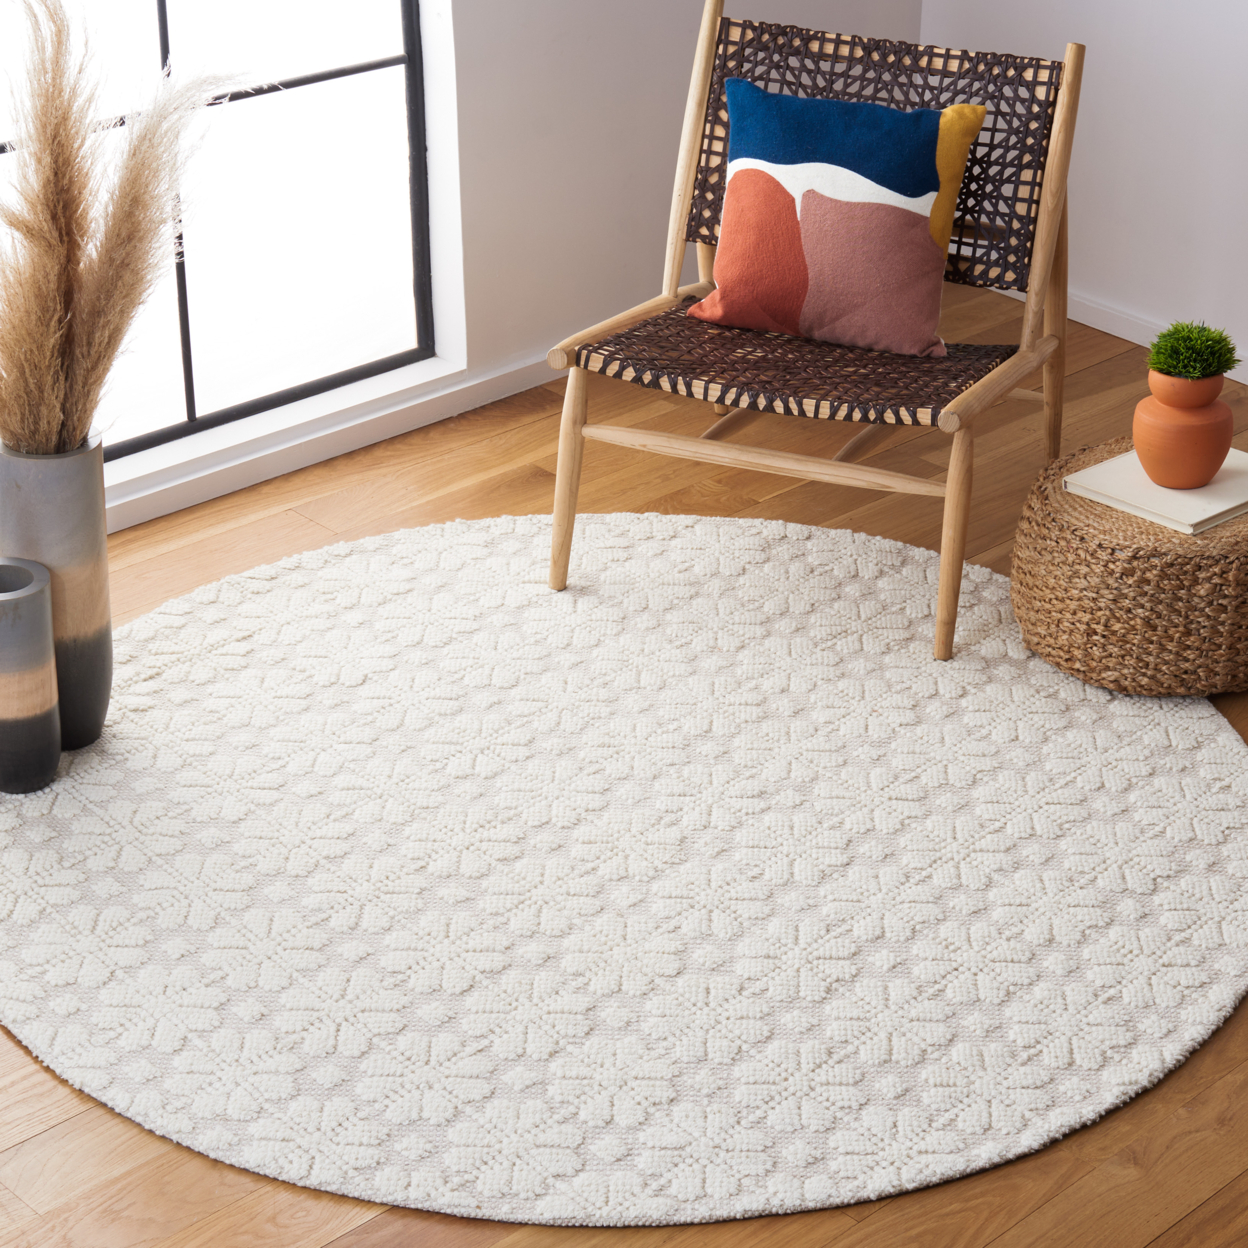 SAFAVIEH Vermont Collection VRM106A Handwoven Ivory Rug - 3 X 5